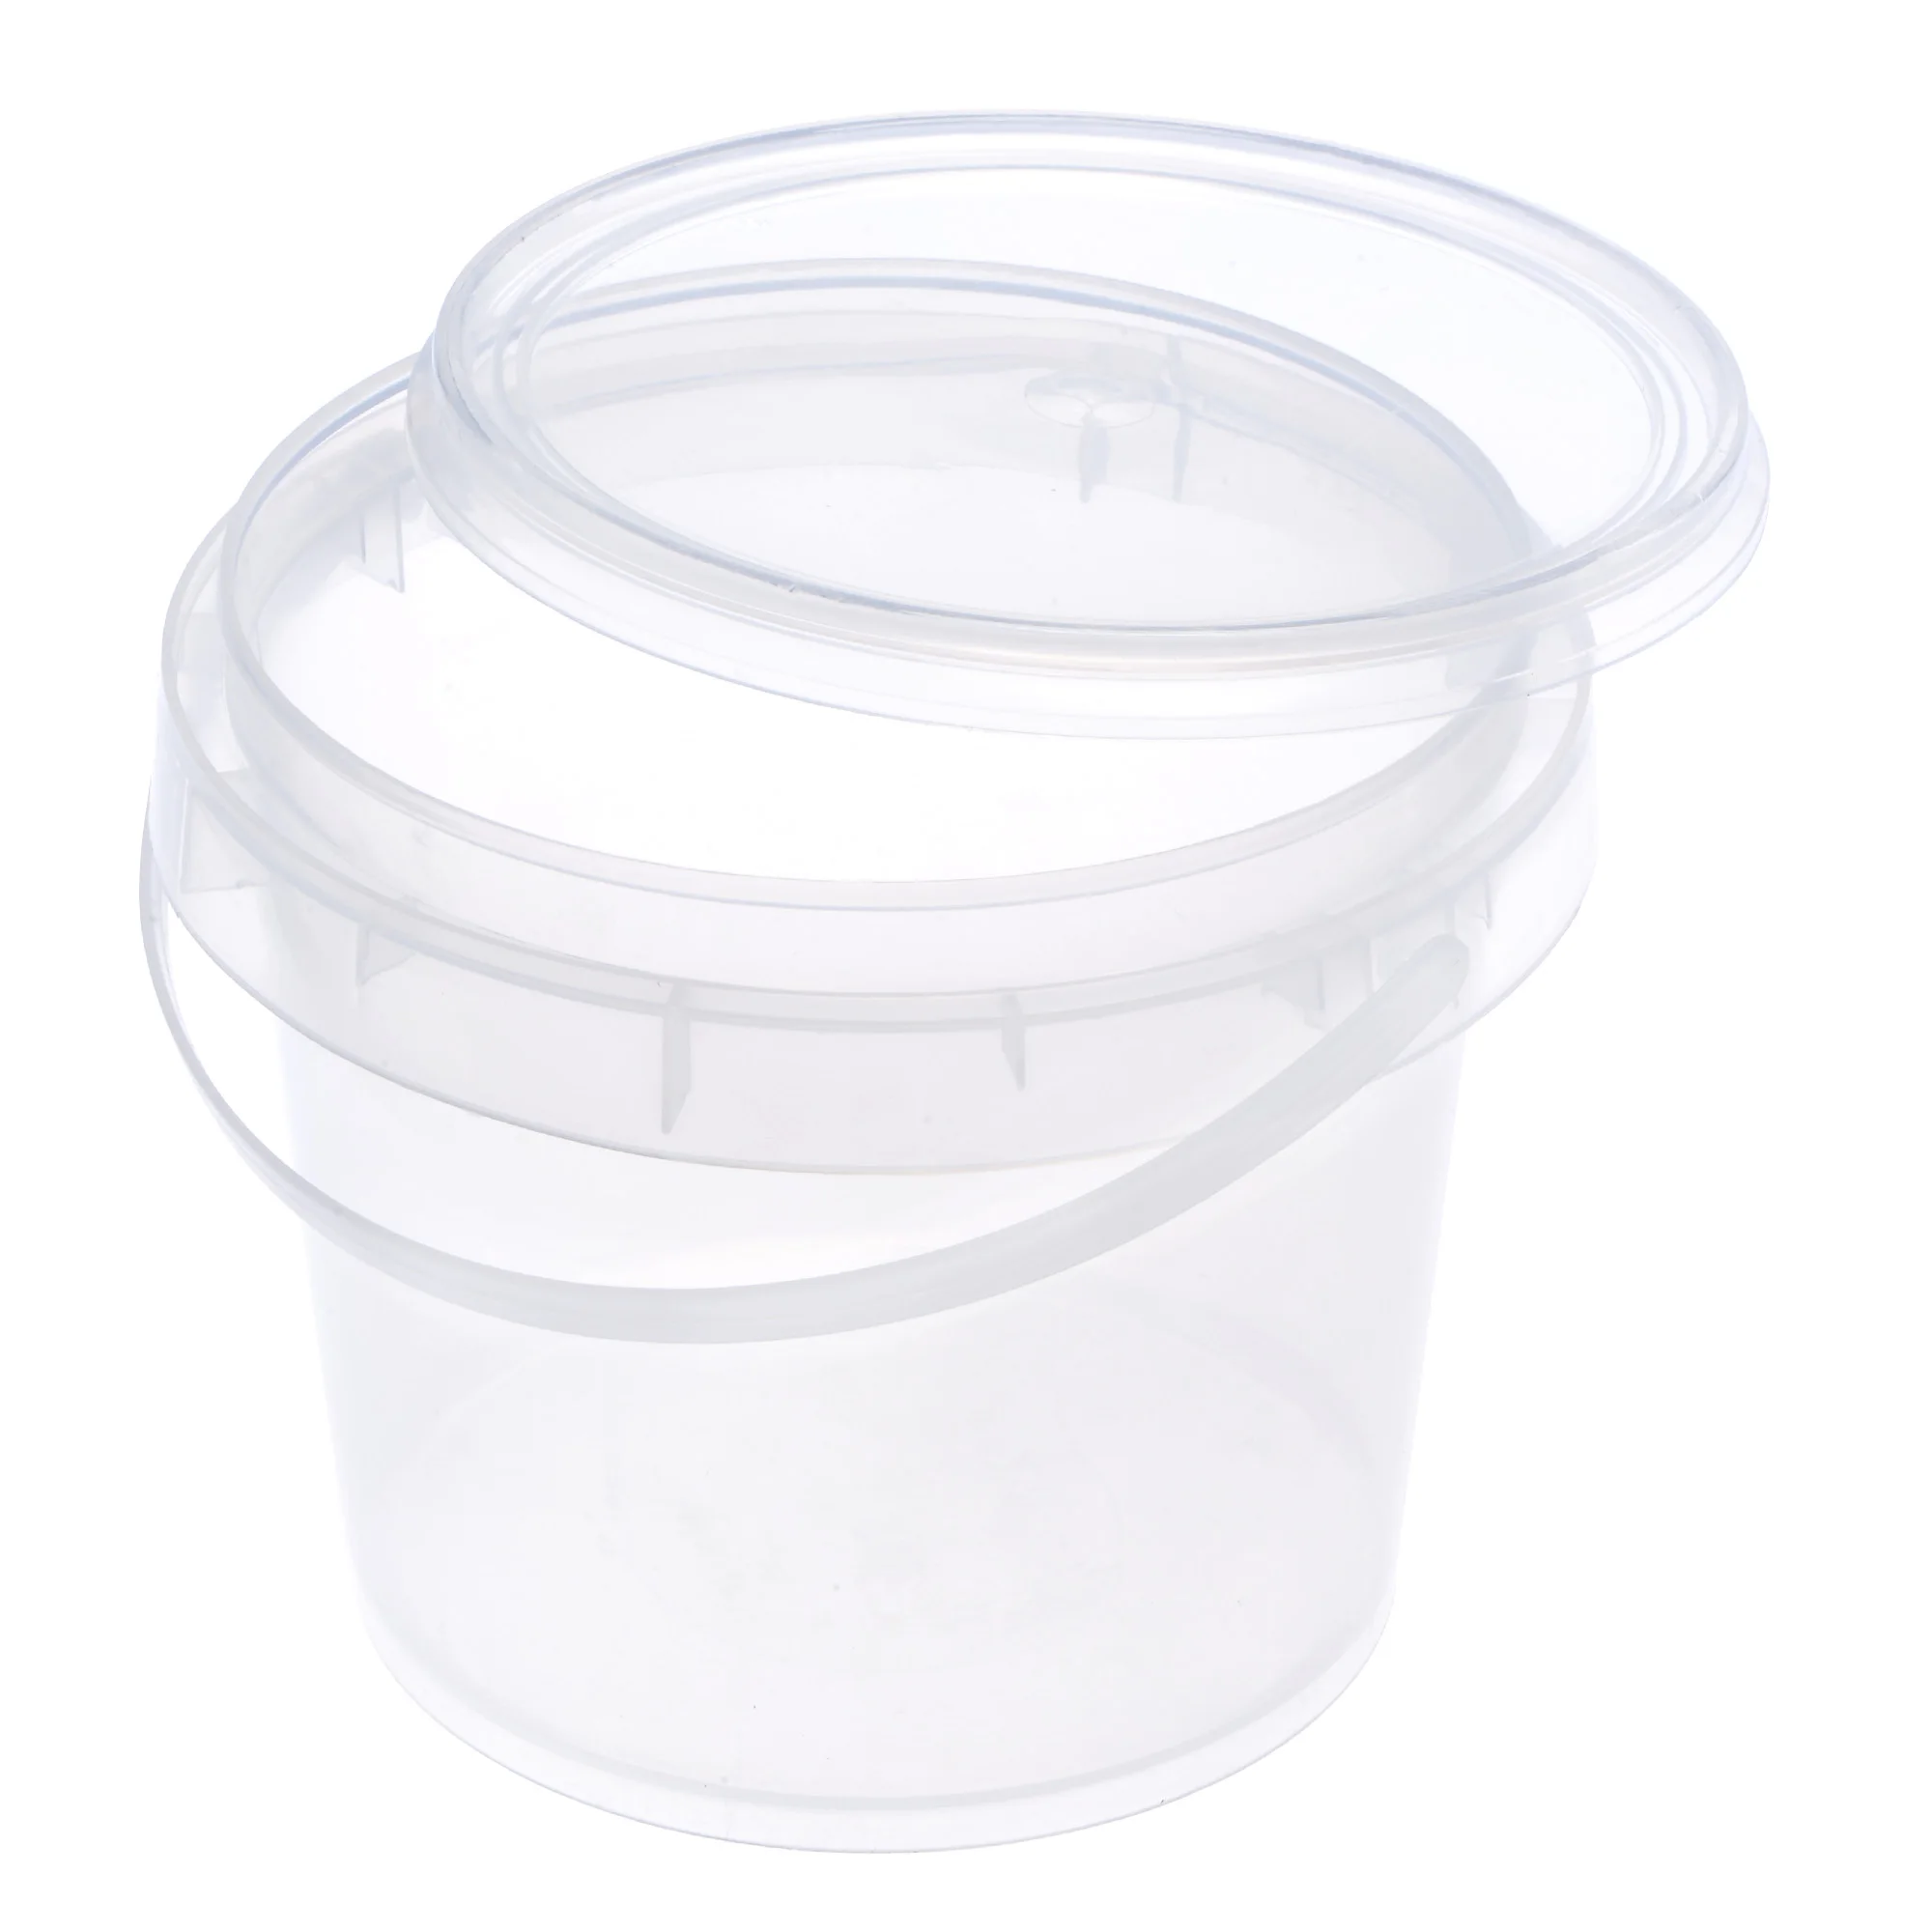 edging brush Uxcell Plastic Paint Pail Multipurpose Container 0.28 -Gallon / 900ml Clear Paint Cup with Handle and Lid best paint brush 